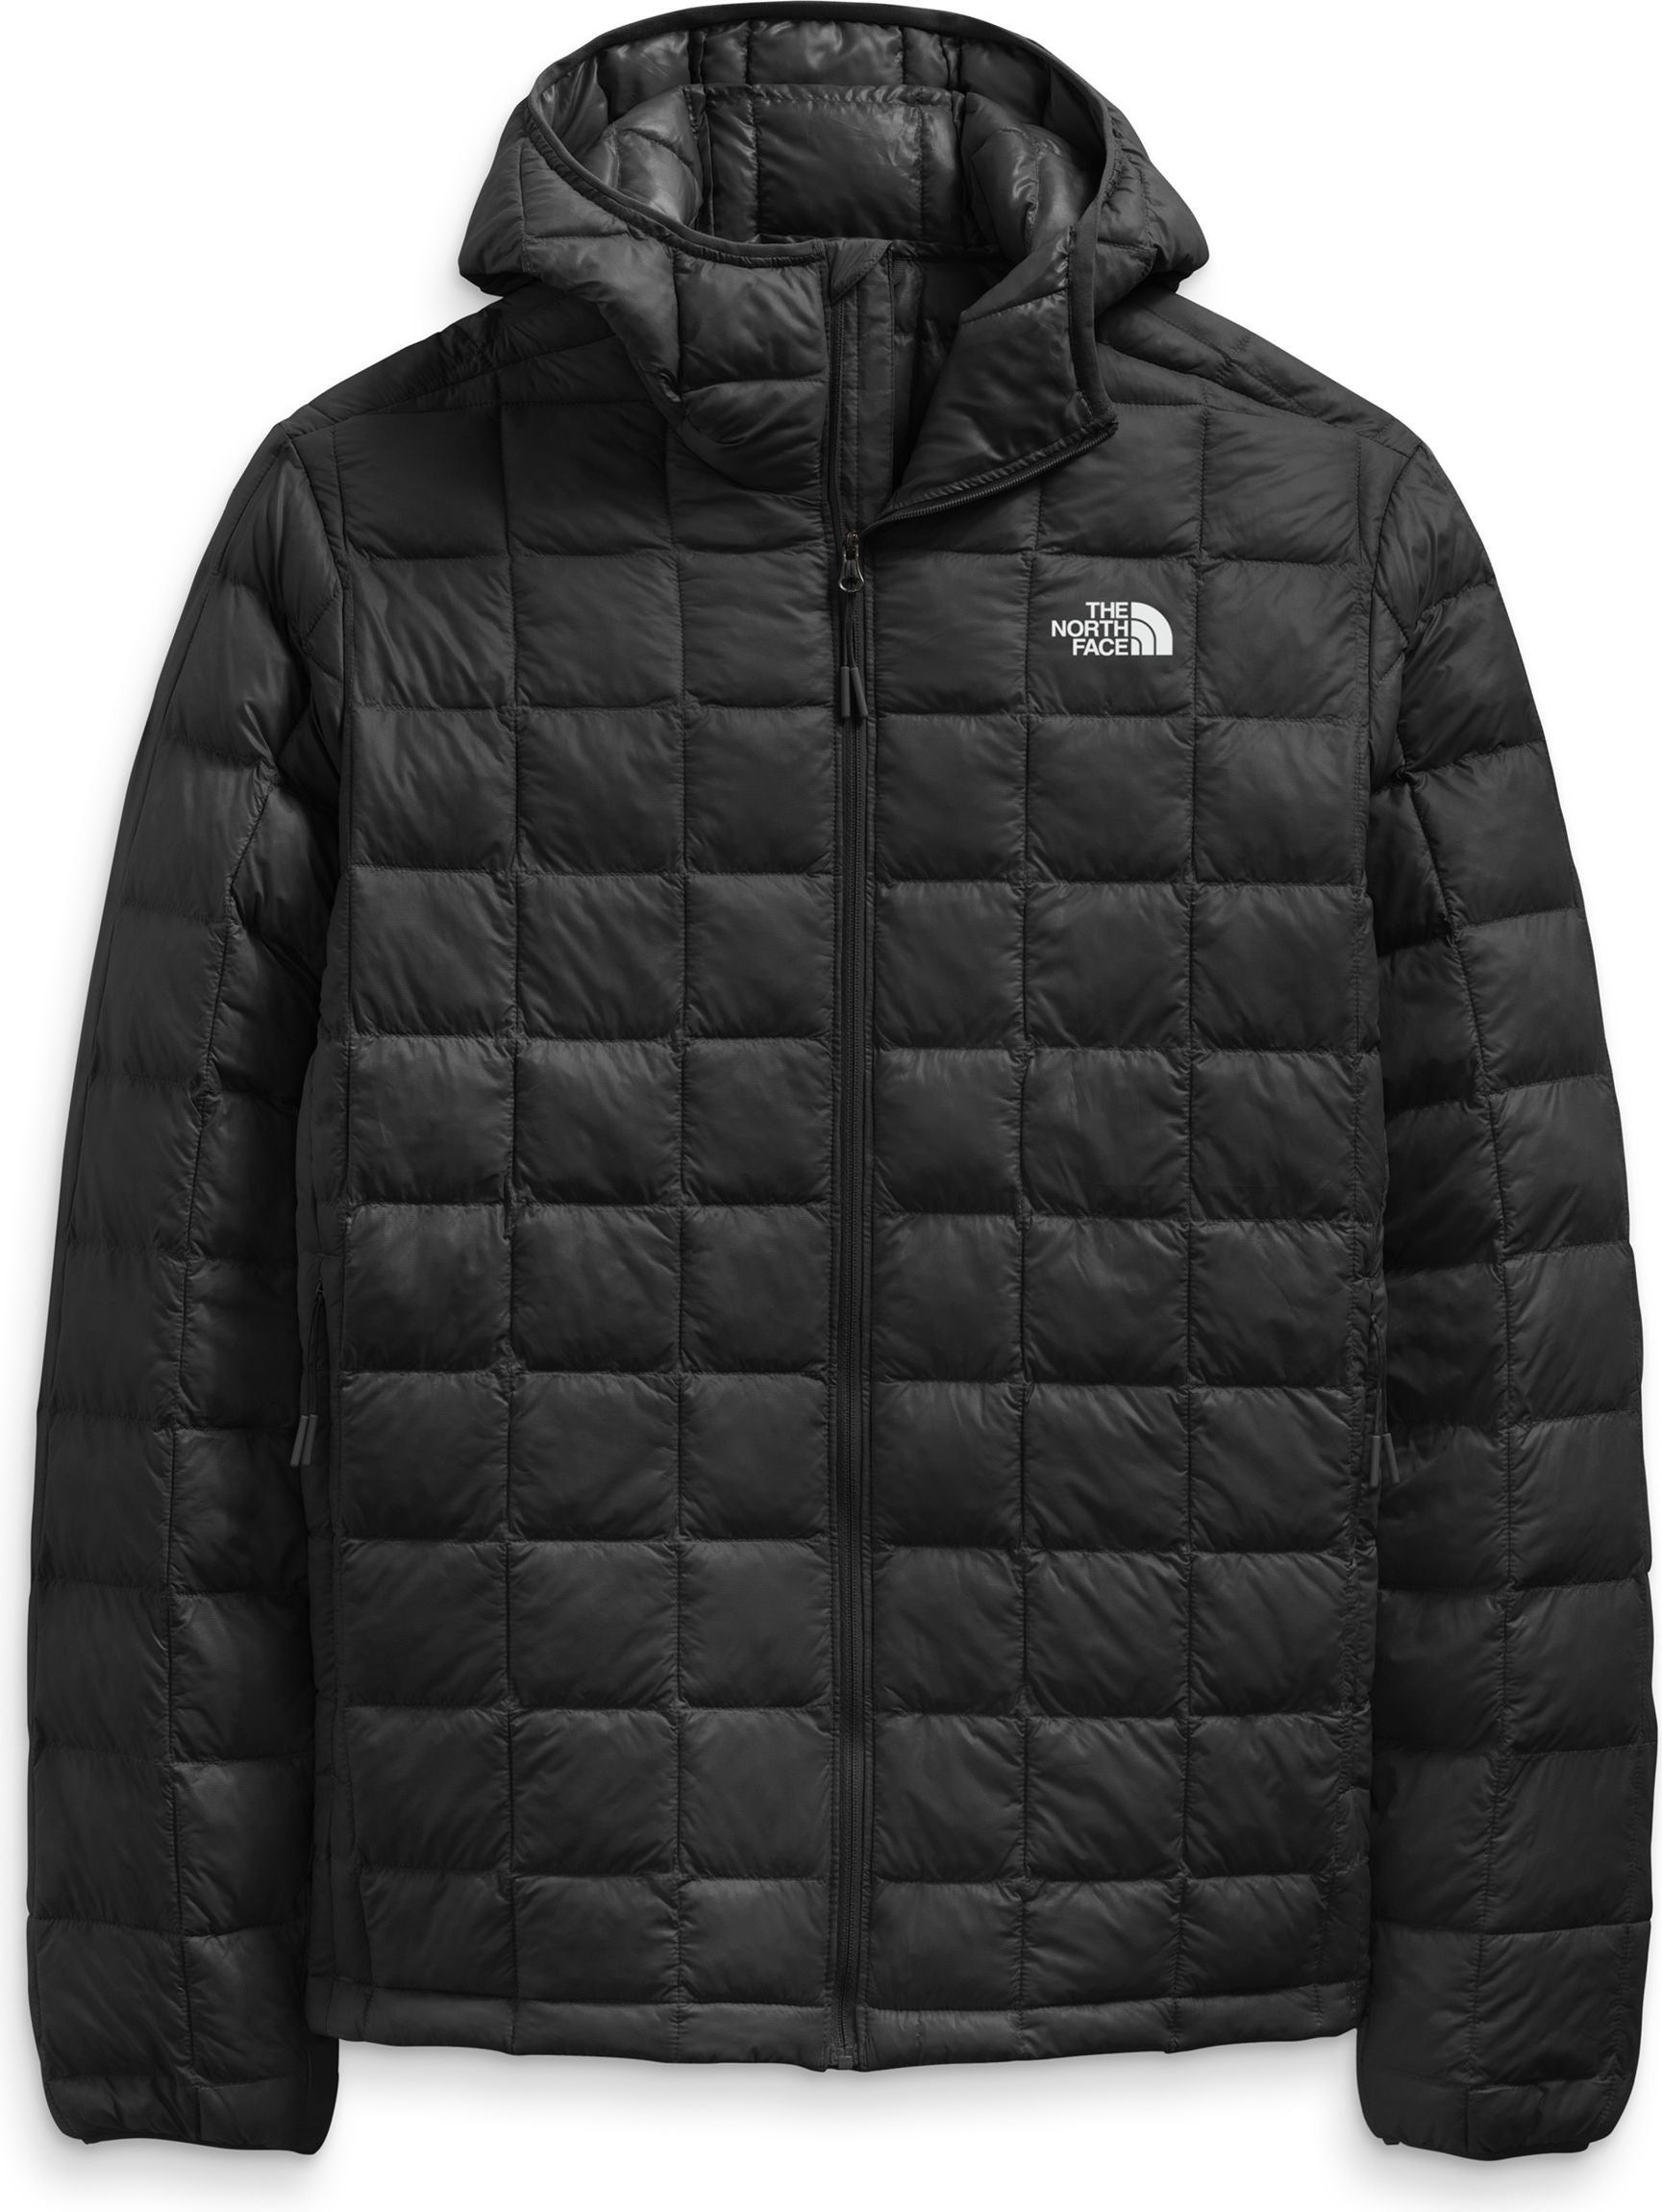 Men's Thermoball Eco Hoodie 2.0 TNF Black